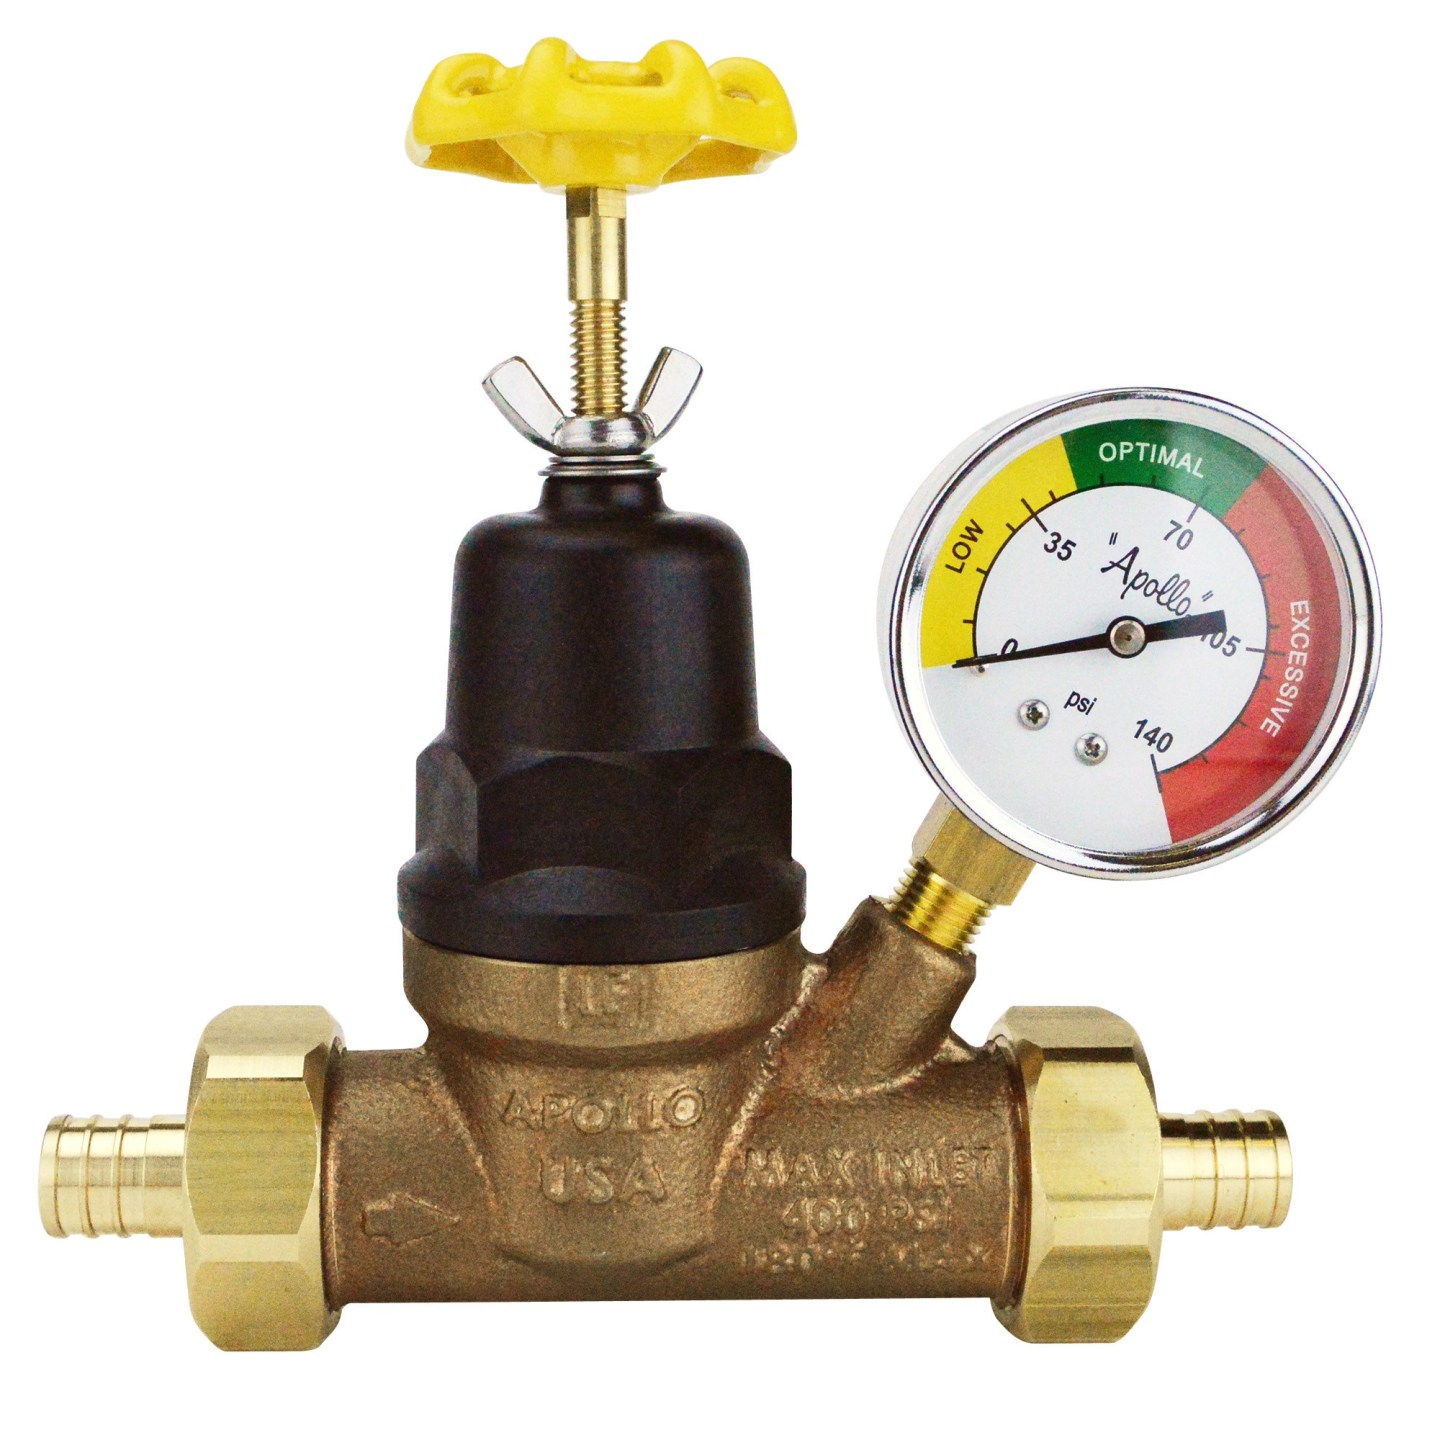 APXPRV34WG Pressure Reducing Valve with Gauge, 3/4 in Connection, PEX Barb, 15 to 75 psi Regulating